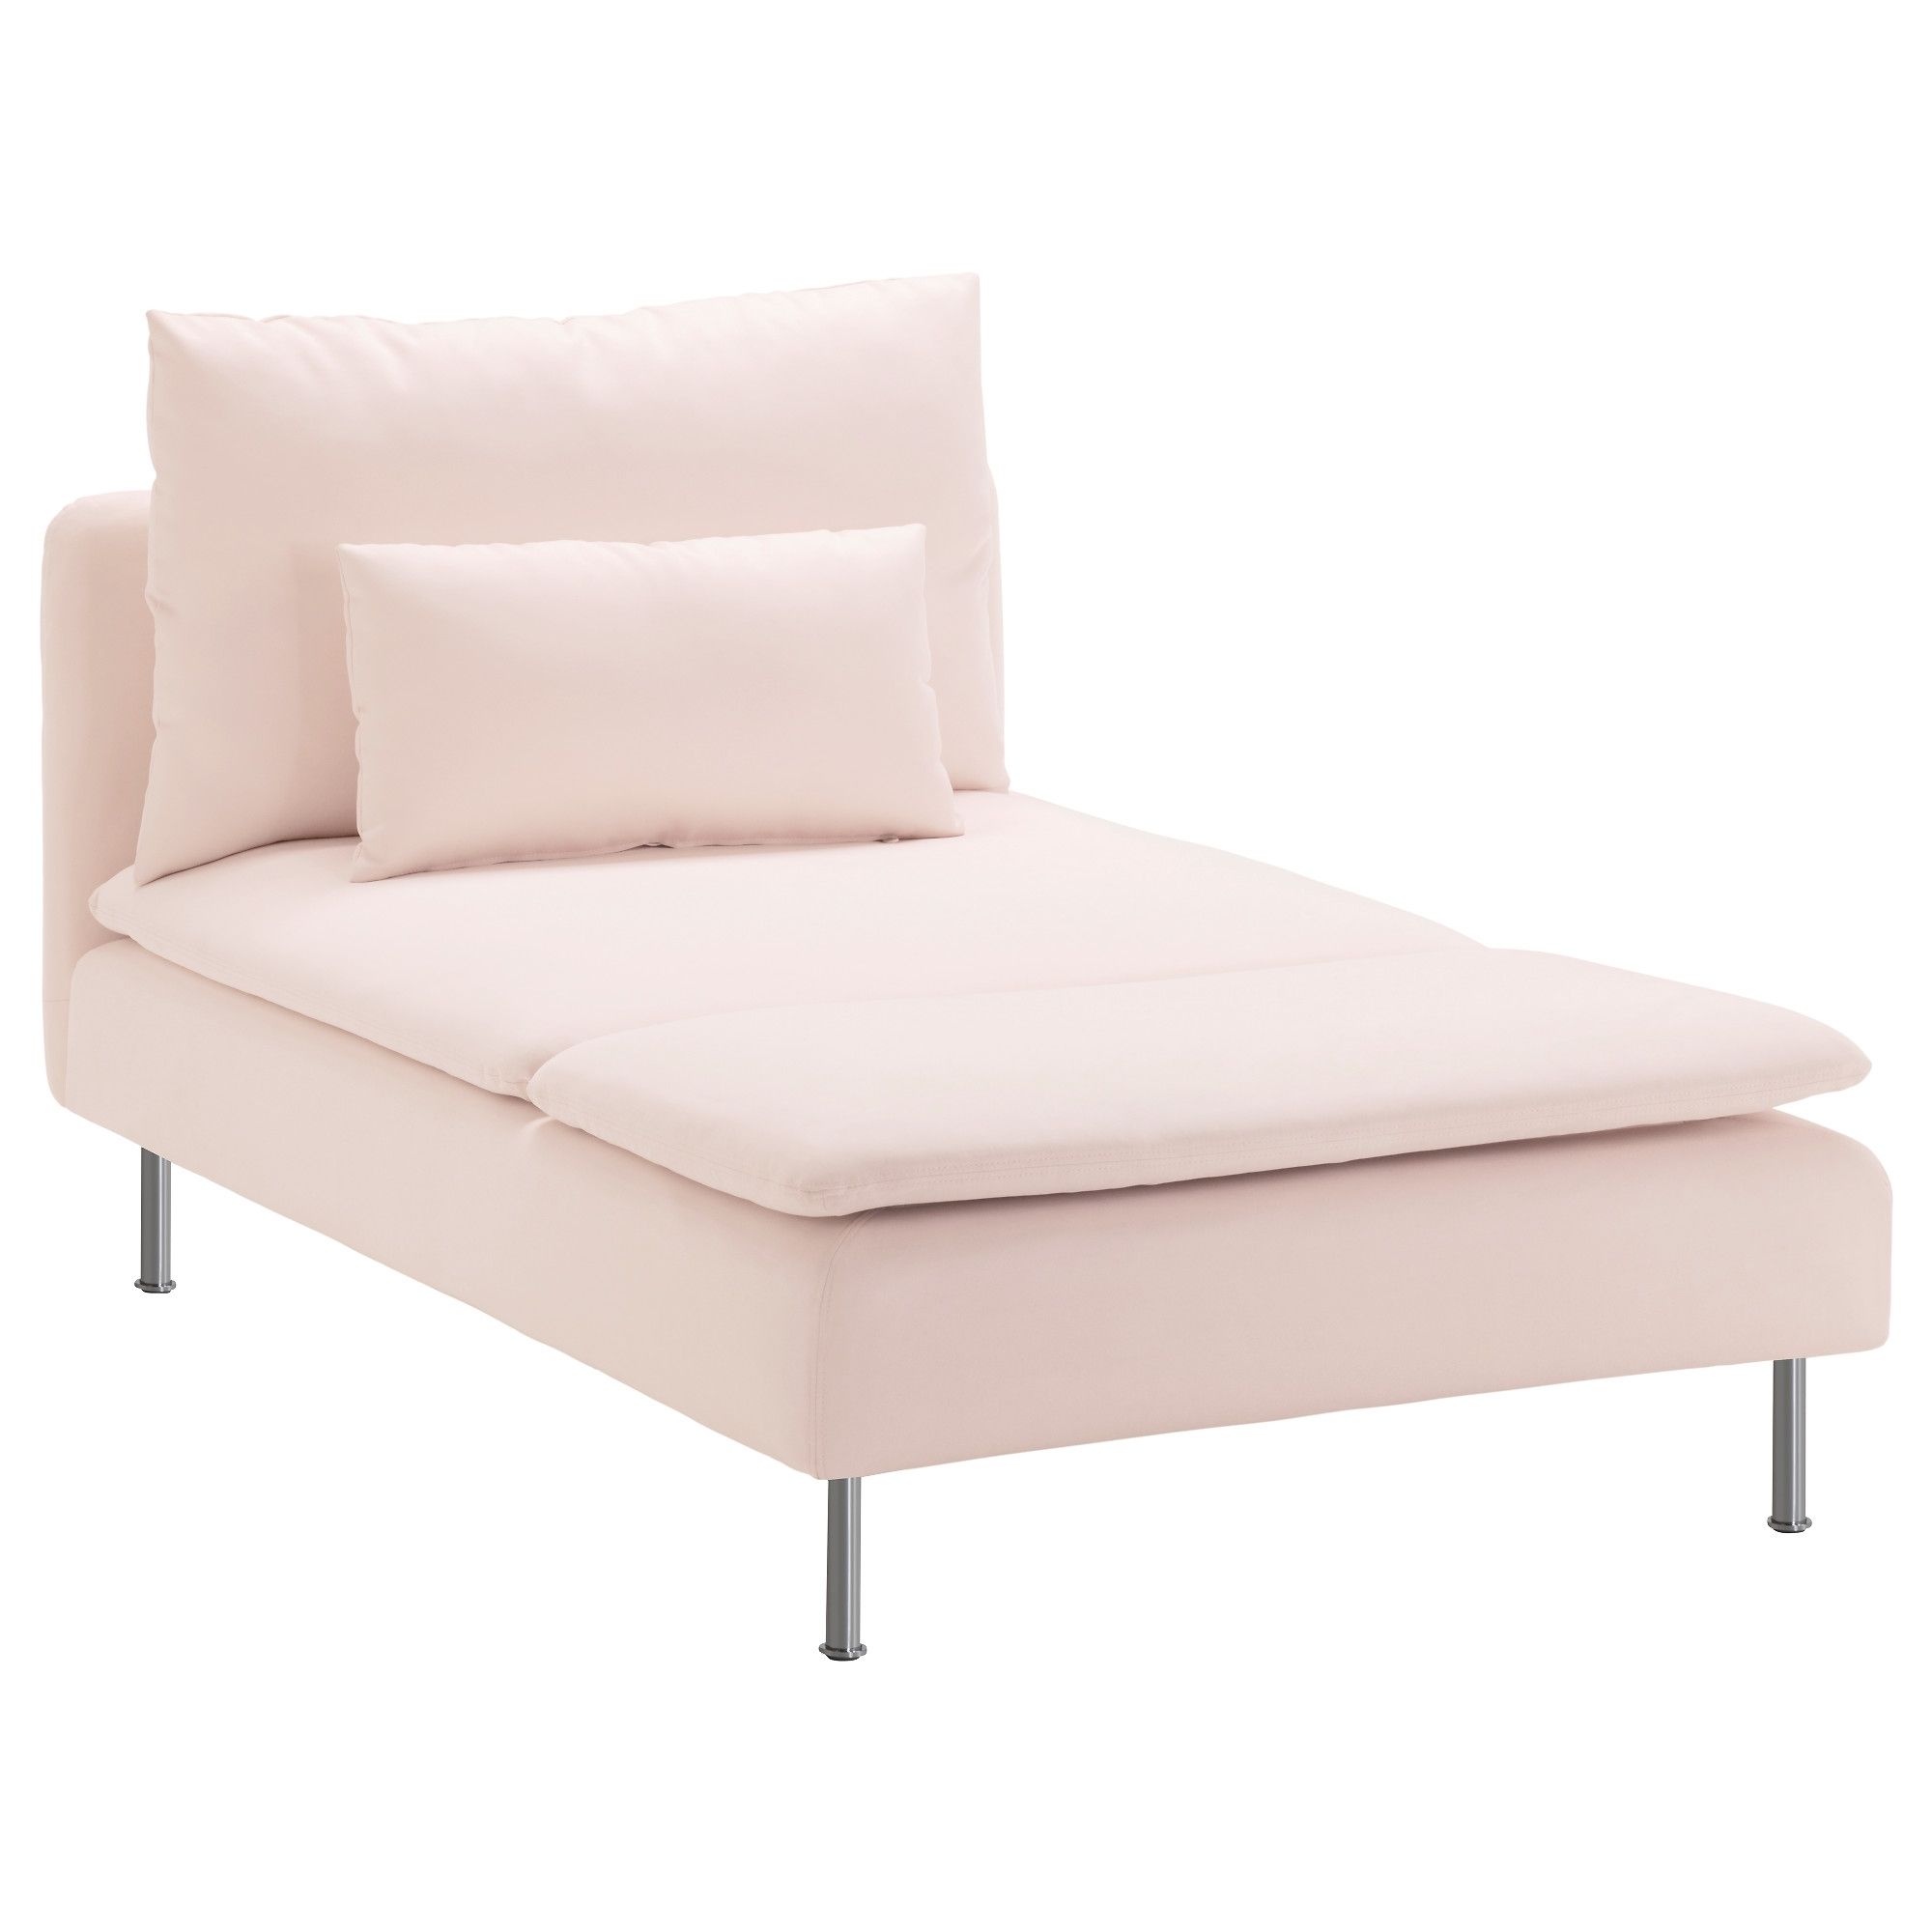 Preferred Söderhamn Chaise – Samsta Light Pink – Ikea With Regard To Pink Chaise Lounges (View 13 of 15)